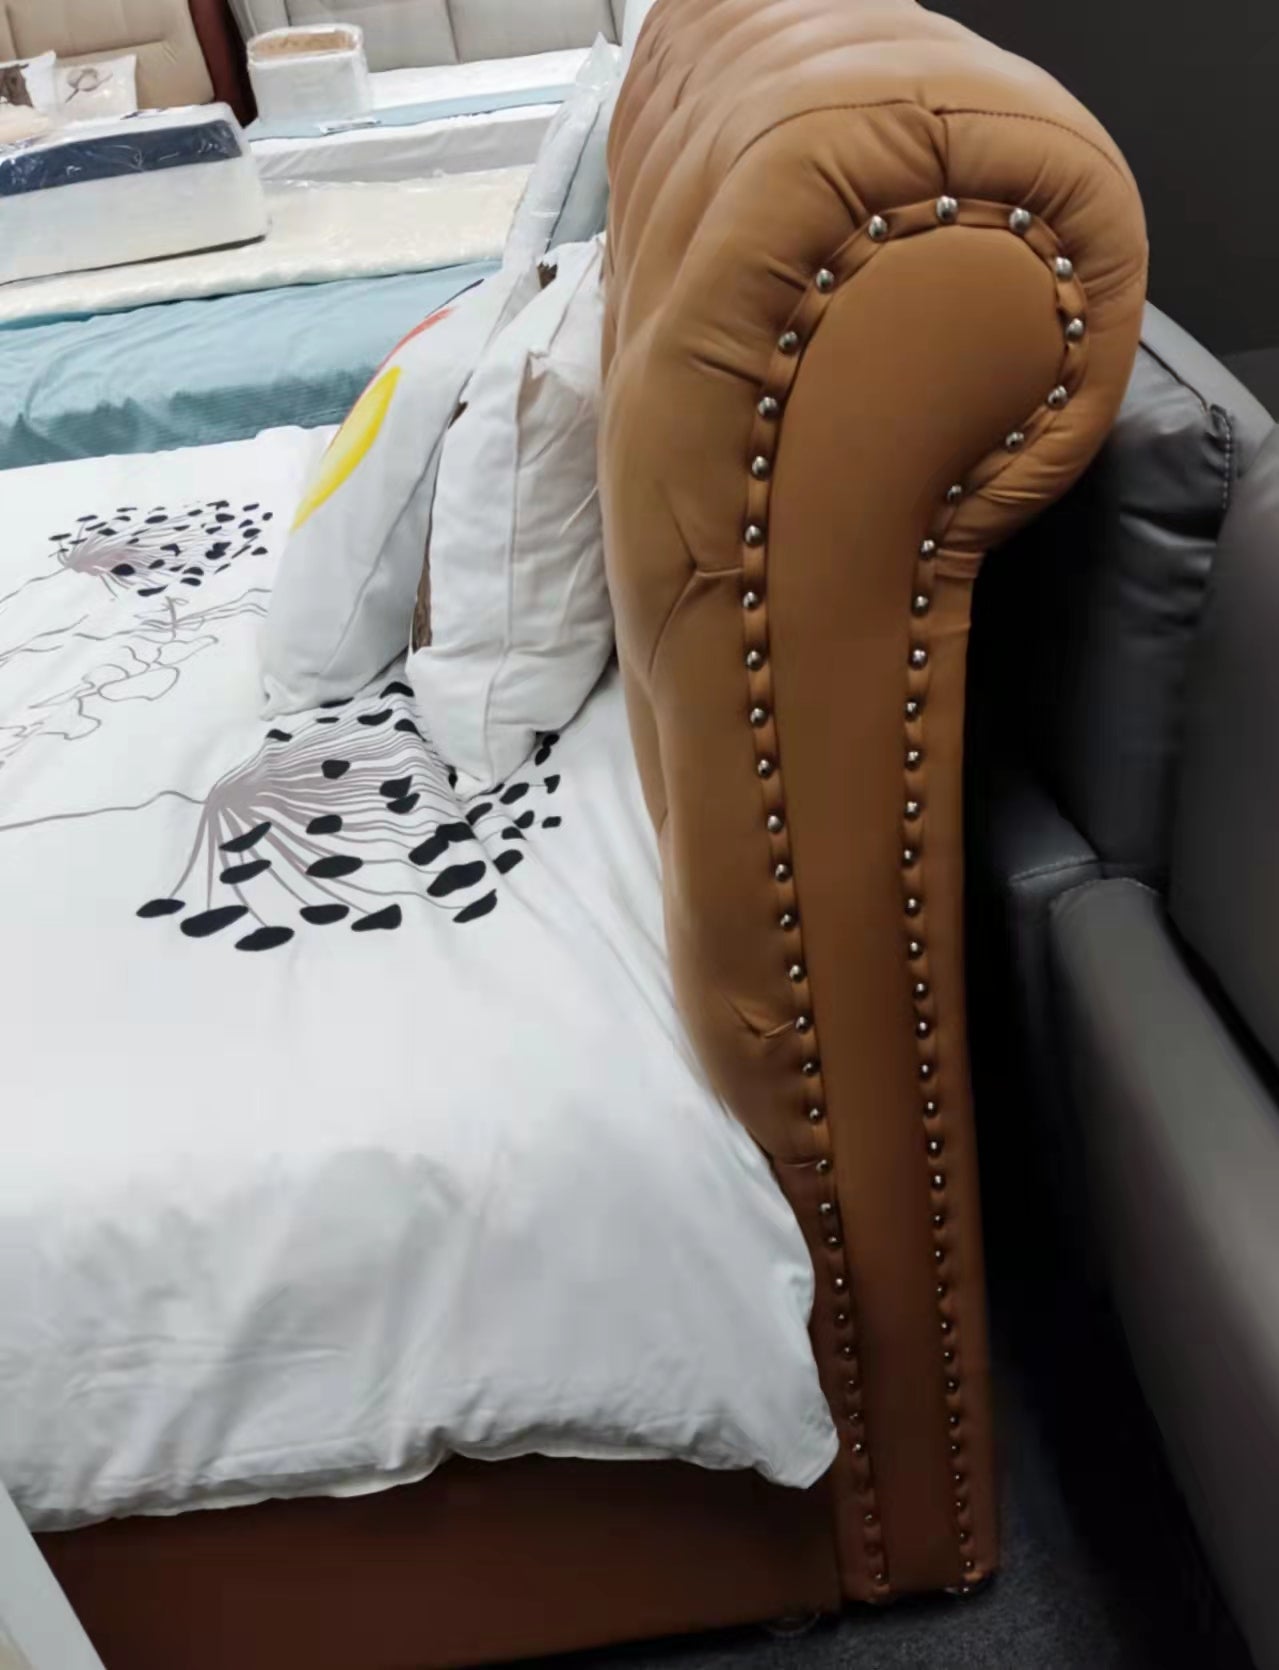 A129 High Quality Genuine Leather Headboard,king size * 2 color available now*